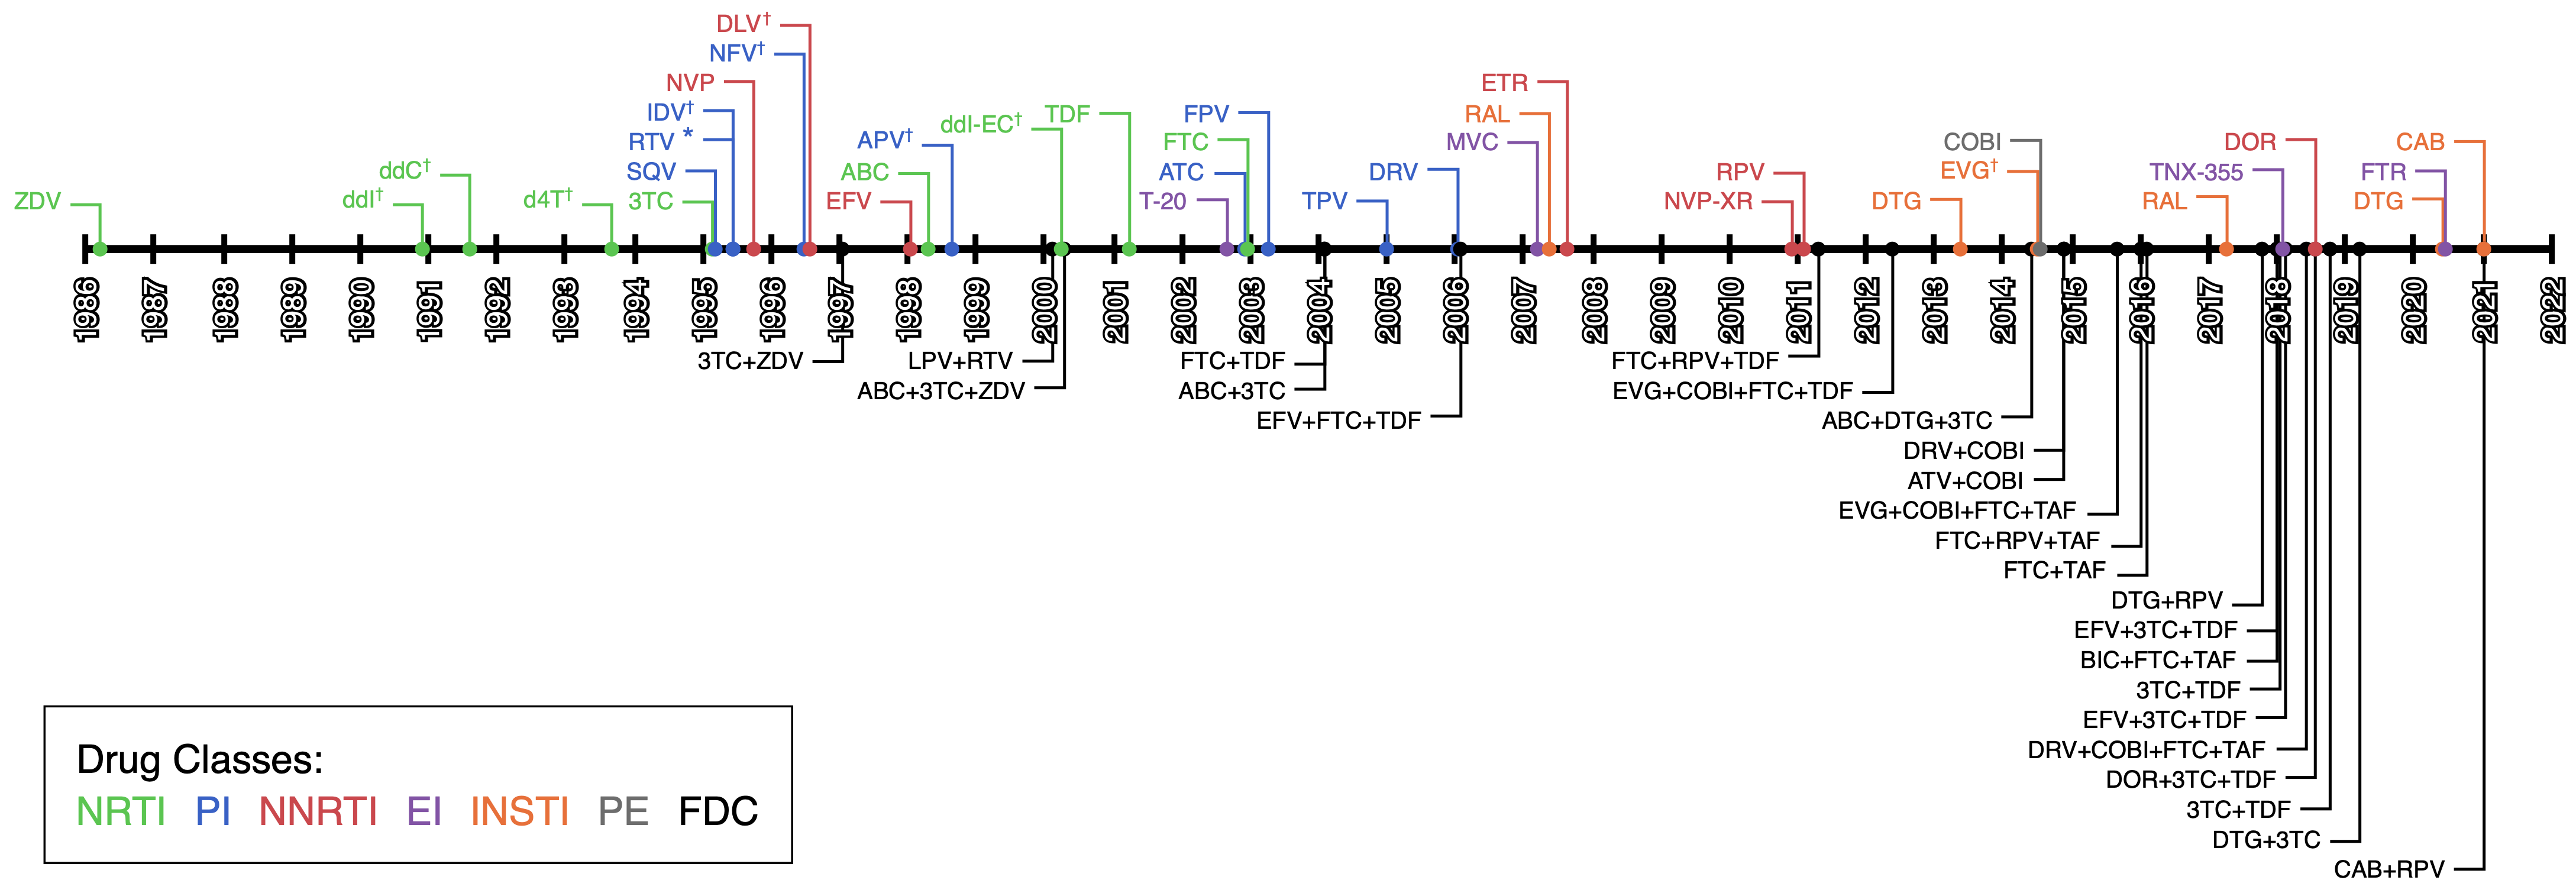 **Timeline of ART drugs FDA approvals.**  
Colored by drug type: Nucleoside Reverse transcriptase inhibitors (NRTI), Non-Nucleoside Reverse transcriptase inhibitors (NNRTI), Protease Inhibitors (PI), Integrase inhibitors (INSTI), Entry Inhibitors (EI) and pharmacokinetic enhancers (PE). Fixed Dose Combination (FDC) single pill regimens are also shown.  
* RPV is often also used as a pharmacokinetic enhancer in combination with other drugs.  
✝ These drugs are no longer approved by the FDA or no longer recommended as first line regiment treatment.  
Information collected from <https://hivinfo.nih.gov/understanding-hiv/fact-sheets/fda-approved-hiv-medicines>, <https://hivinfo.nih.gov/understanding-hiv/infographics/fda-approval-hiv-medicines> and <https://www.accessdata.fda.gov/scripts/cder/daf/index.cfm>.  
See also Table \@ref(tab:tableDrugs).